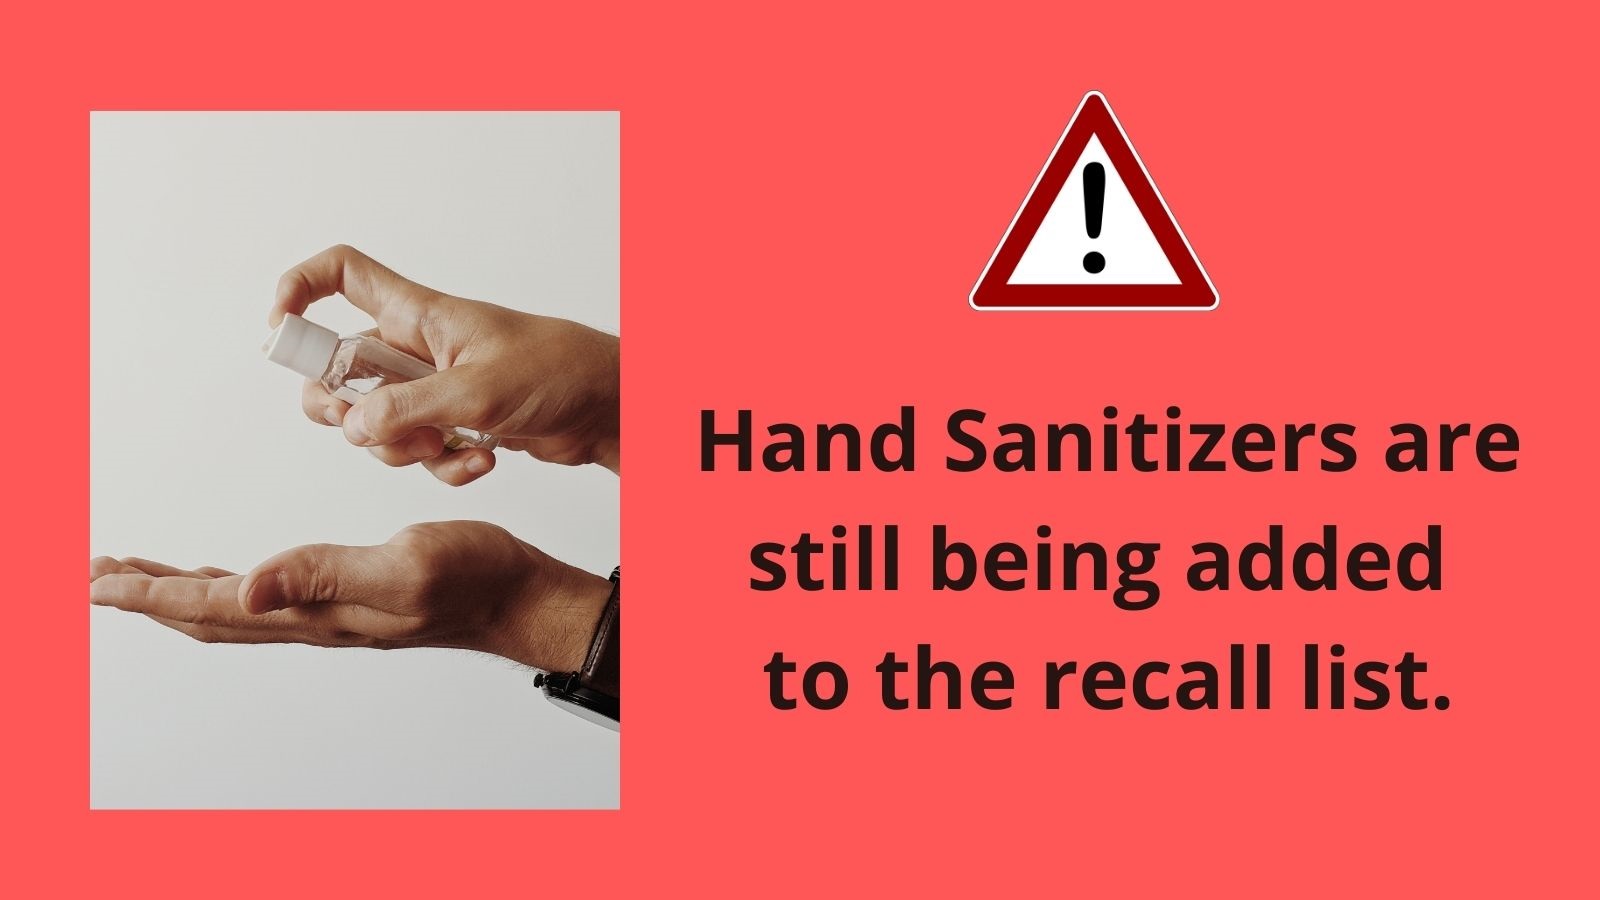 cautions against use of recalled hand sanitizers